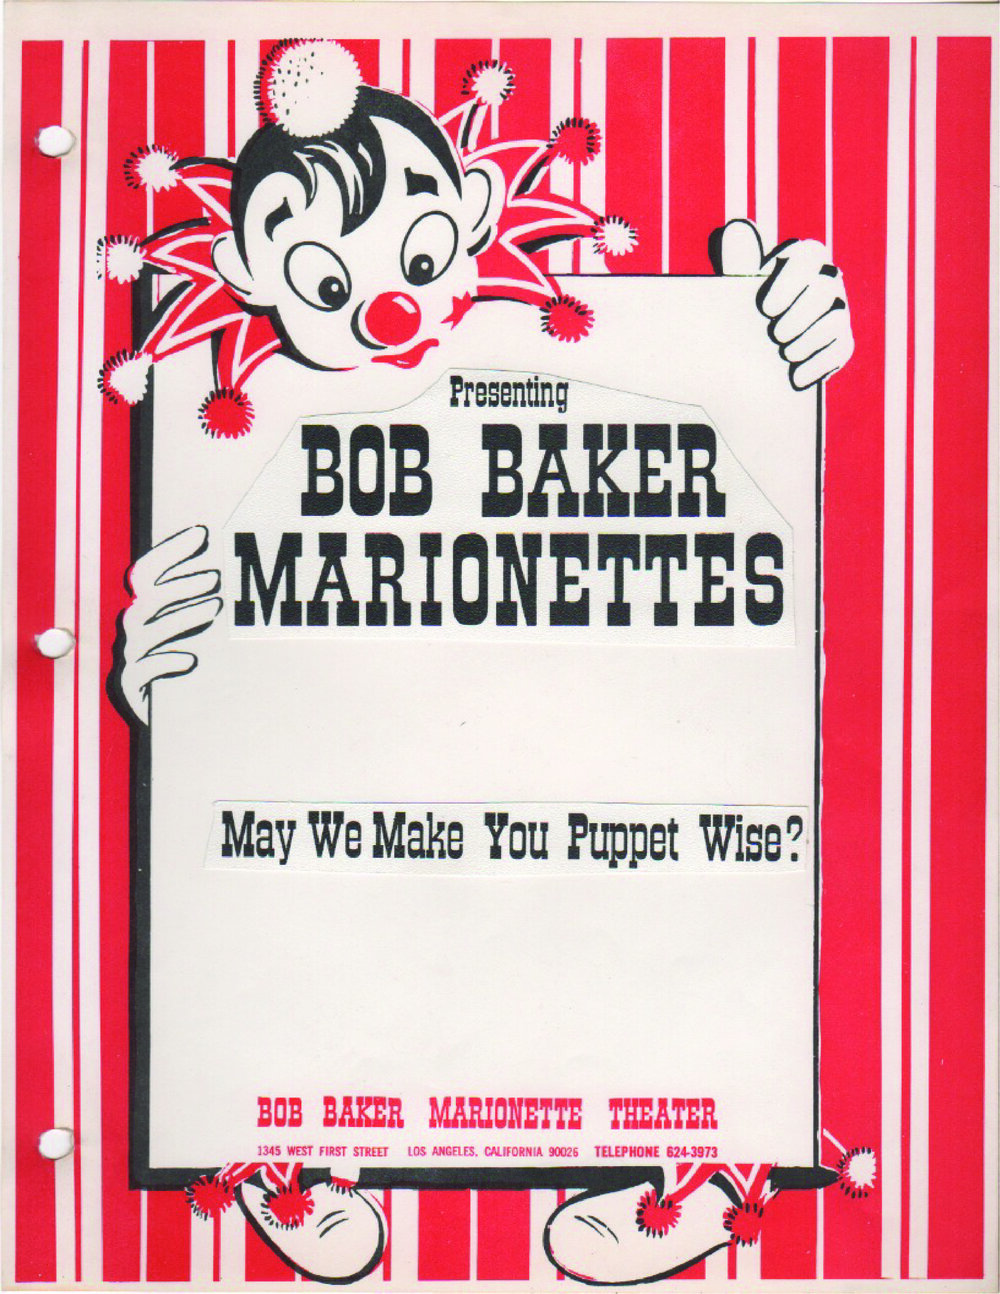 Bob Baker Marionette Theater: 60 Years of Joy & Wonder - Forest Lawn